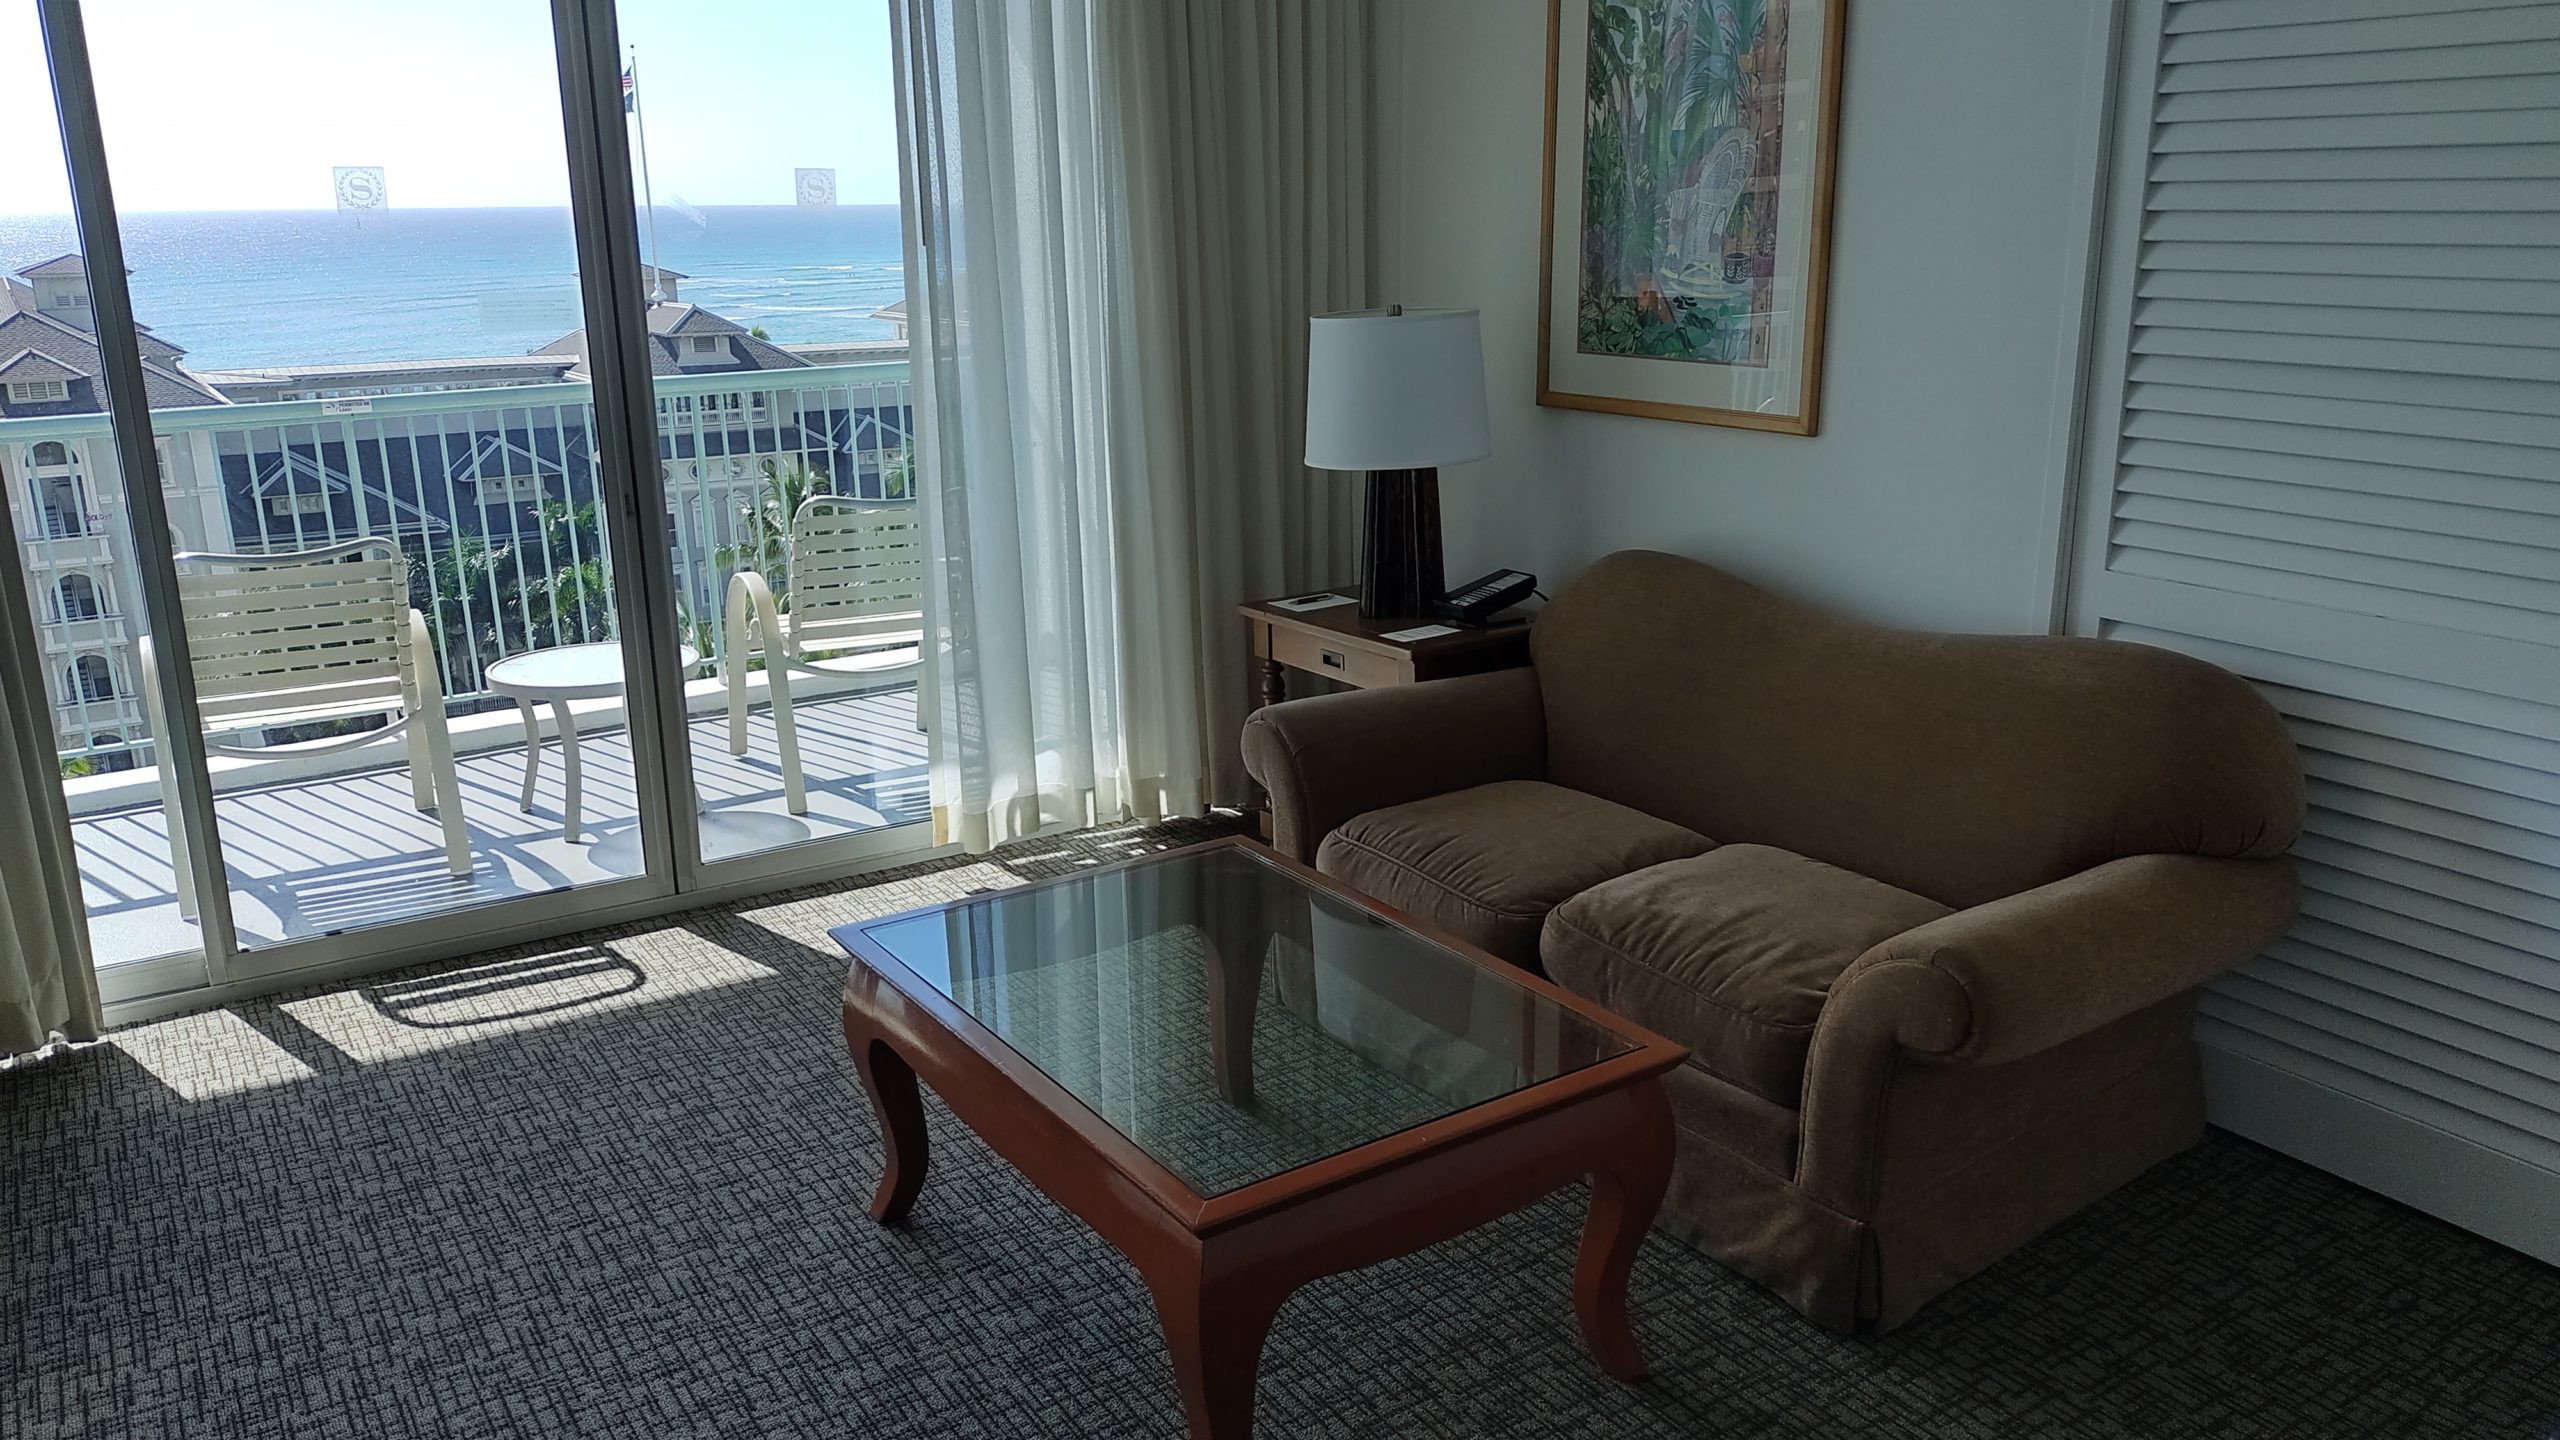 picture of the living room and main lanai showing ocean view.